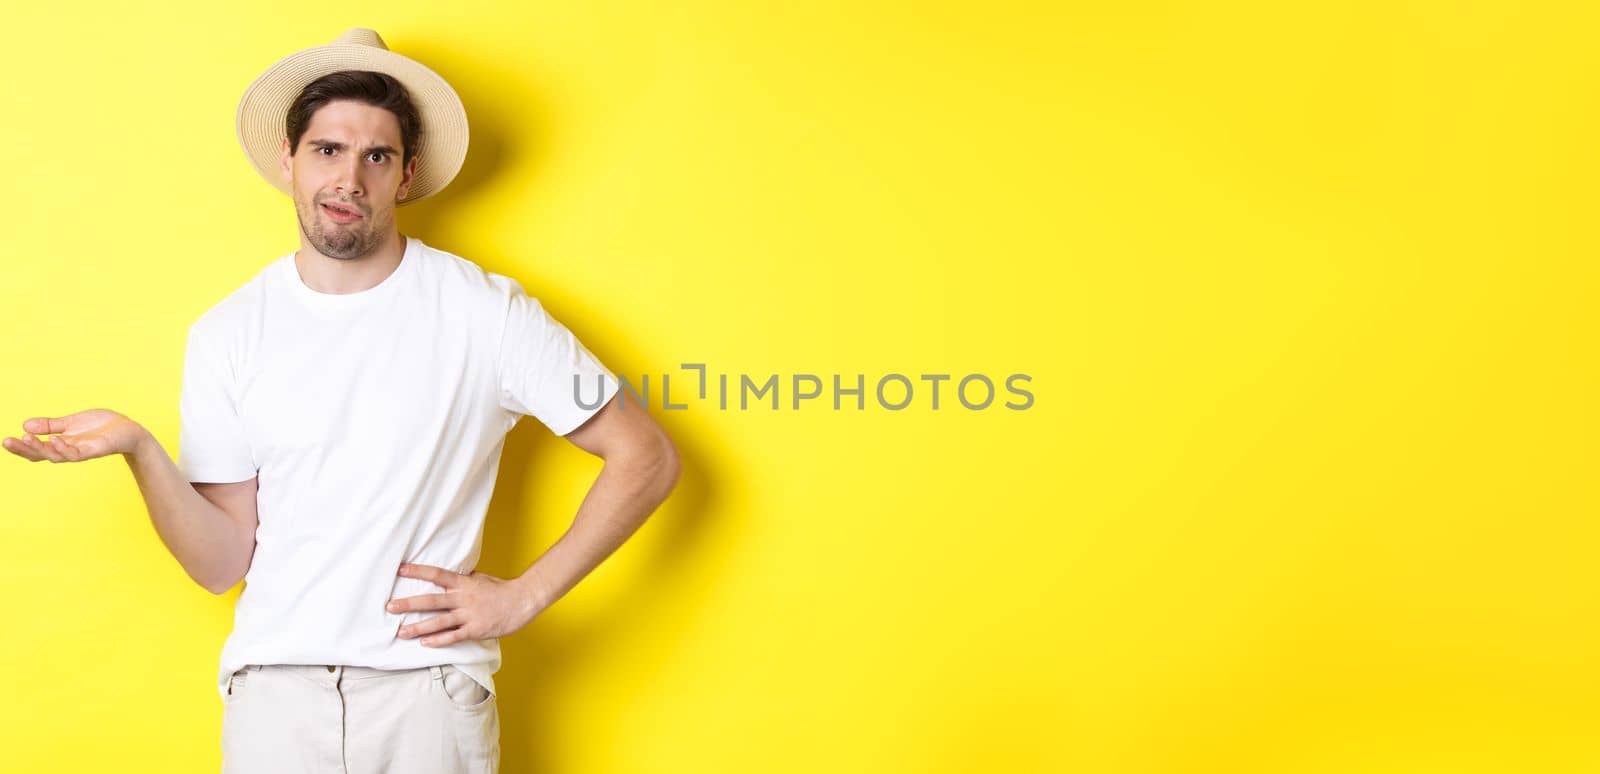 Concept of tourism and summer. Young skeptical tourist complaining, looking judgemental, standing over yellow background.